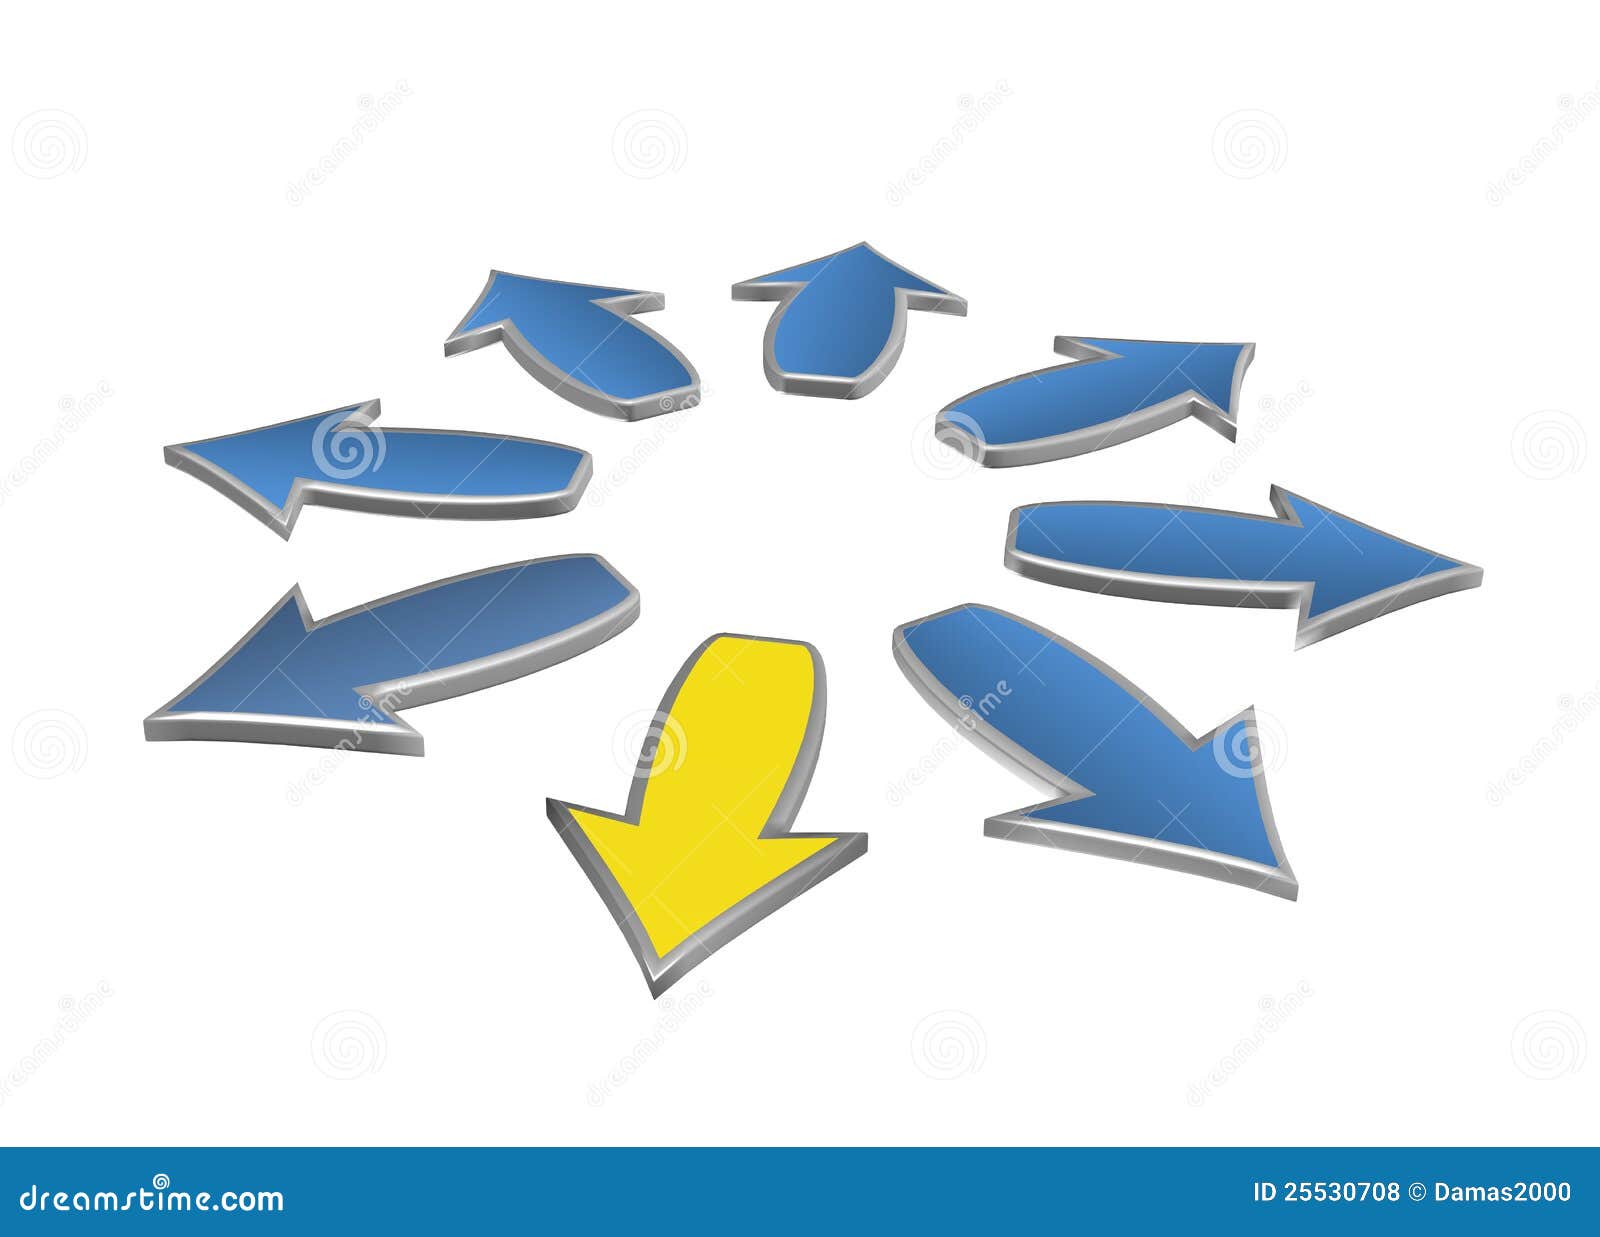 8 blue arrows and one yellow, isolated on a white backgrounds